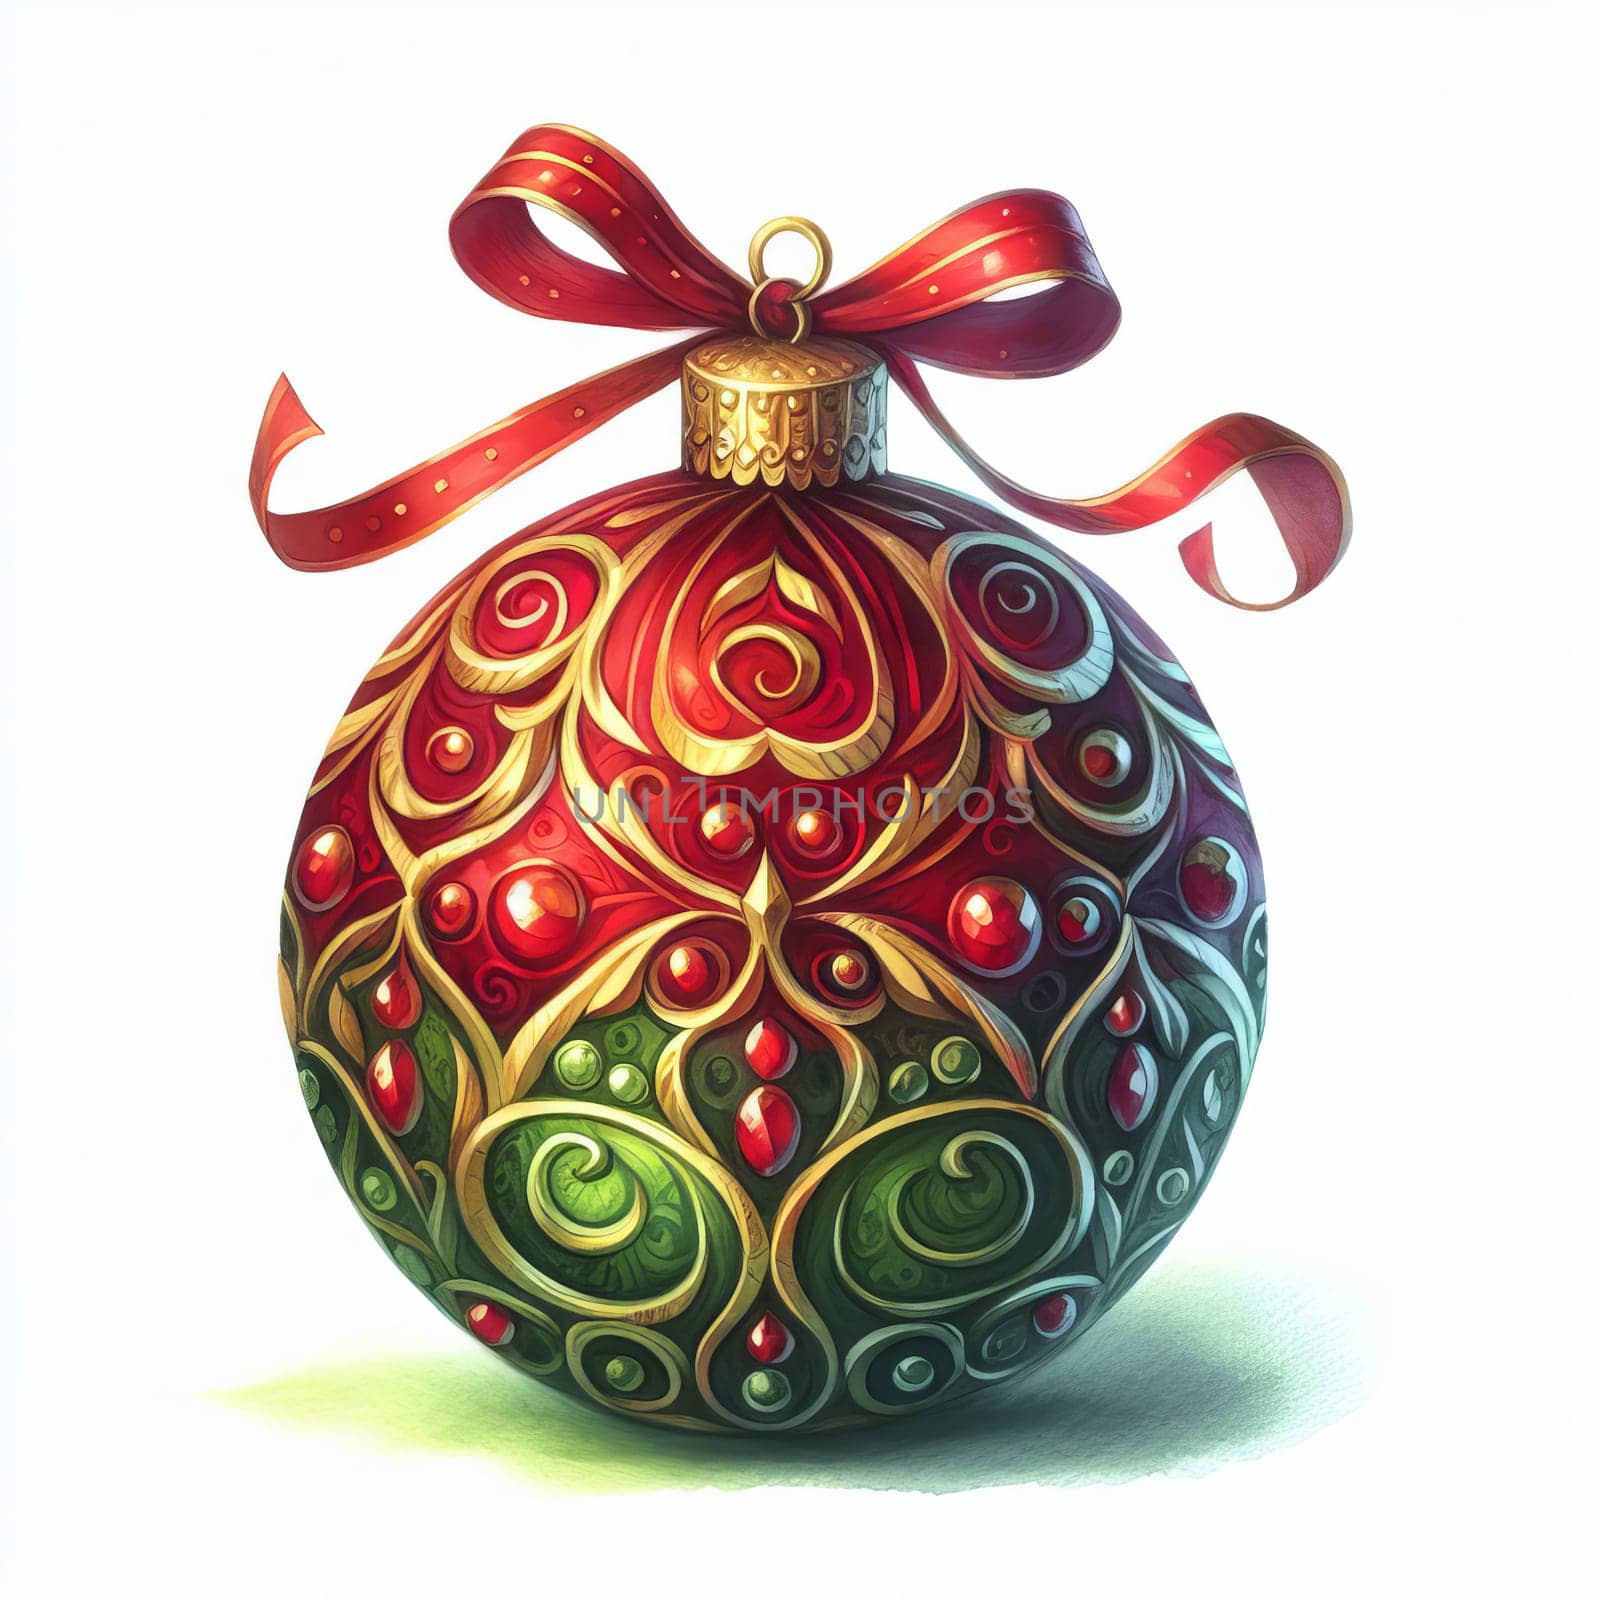 Red and green Christmas ornament ball, adorned with intricate swirls and dots, and topped with a red ribbon - watercolor painting